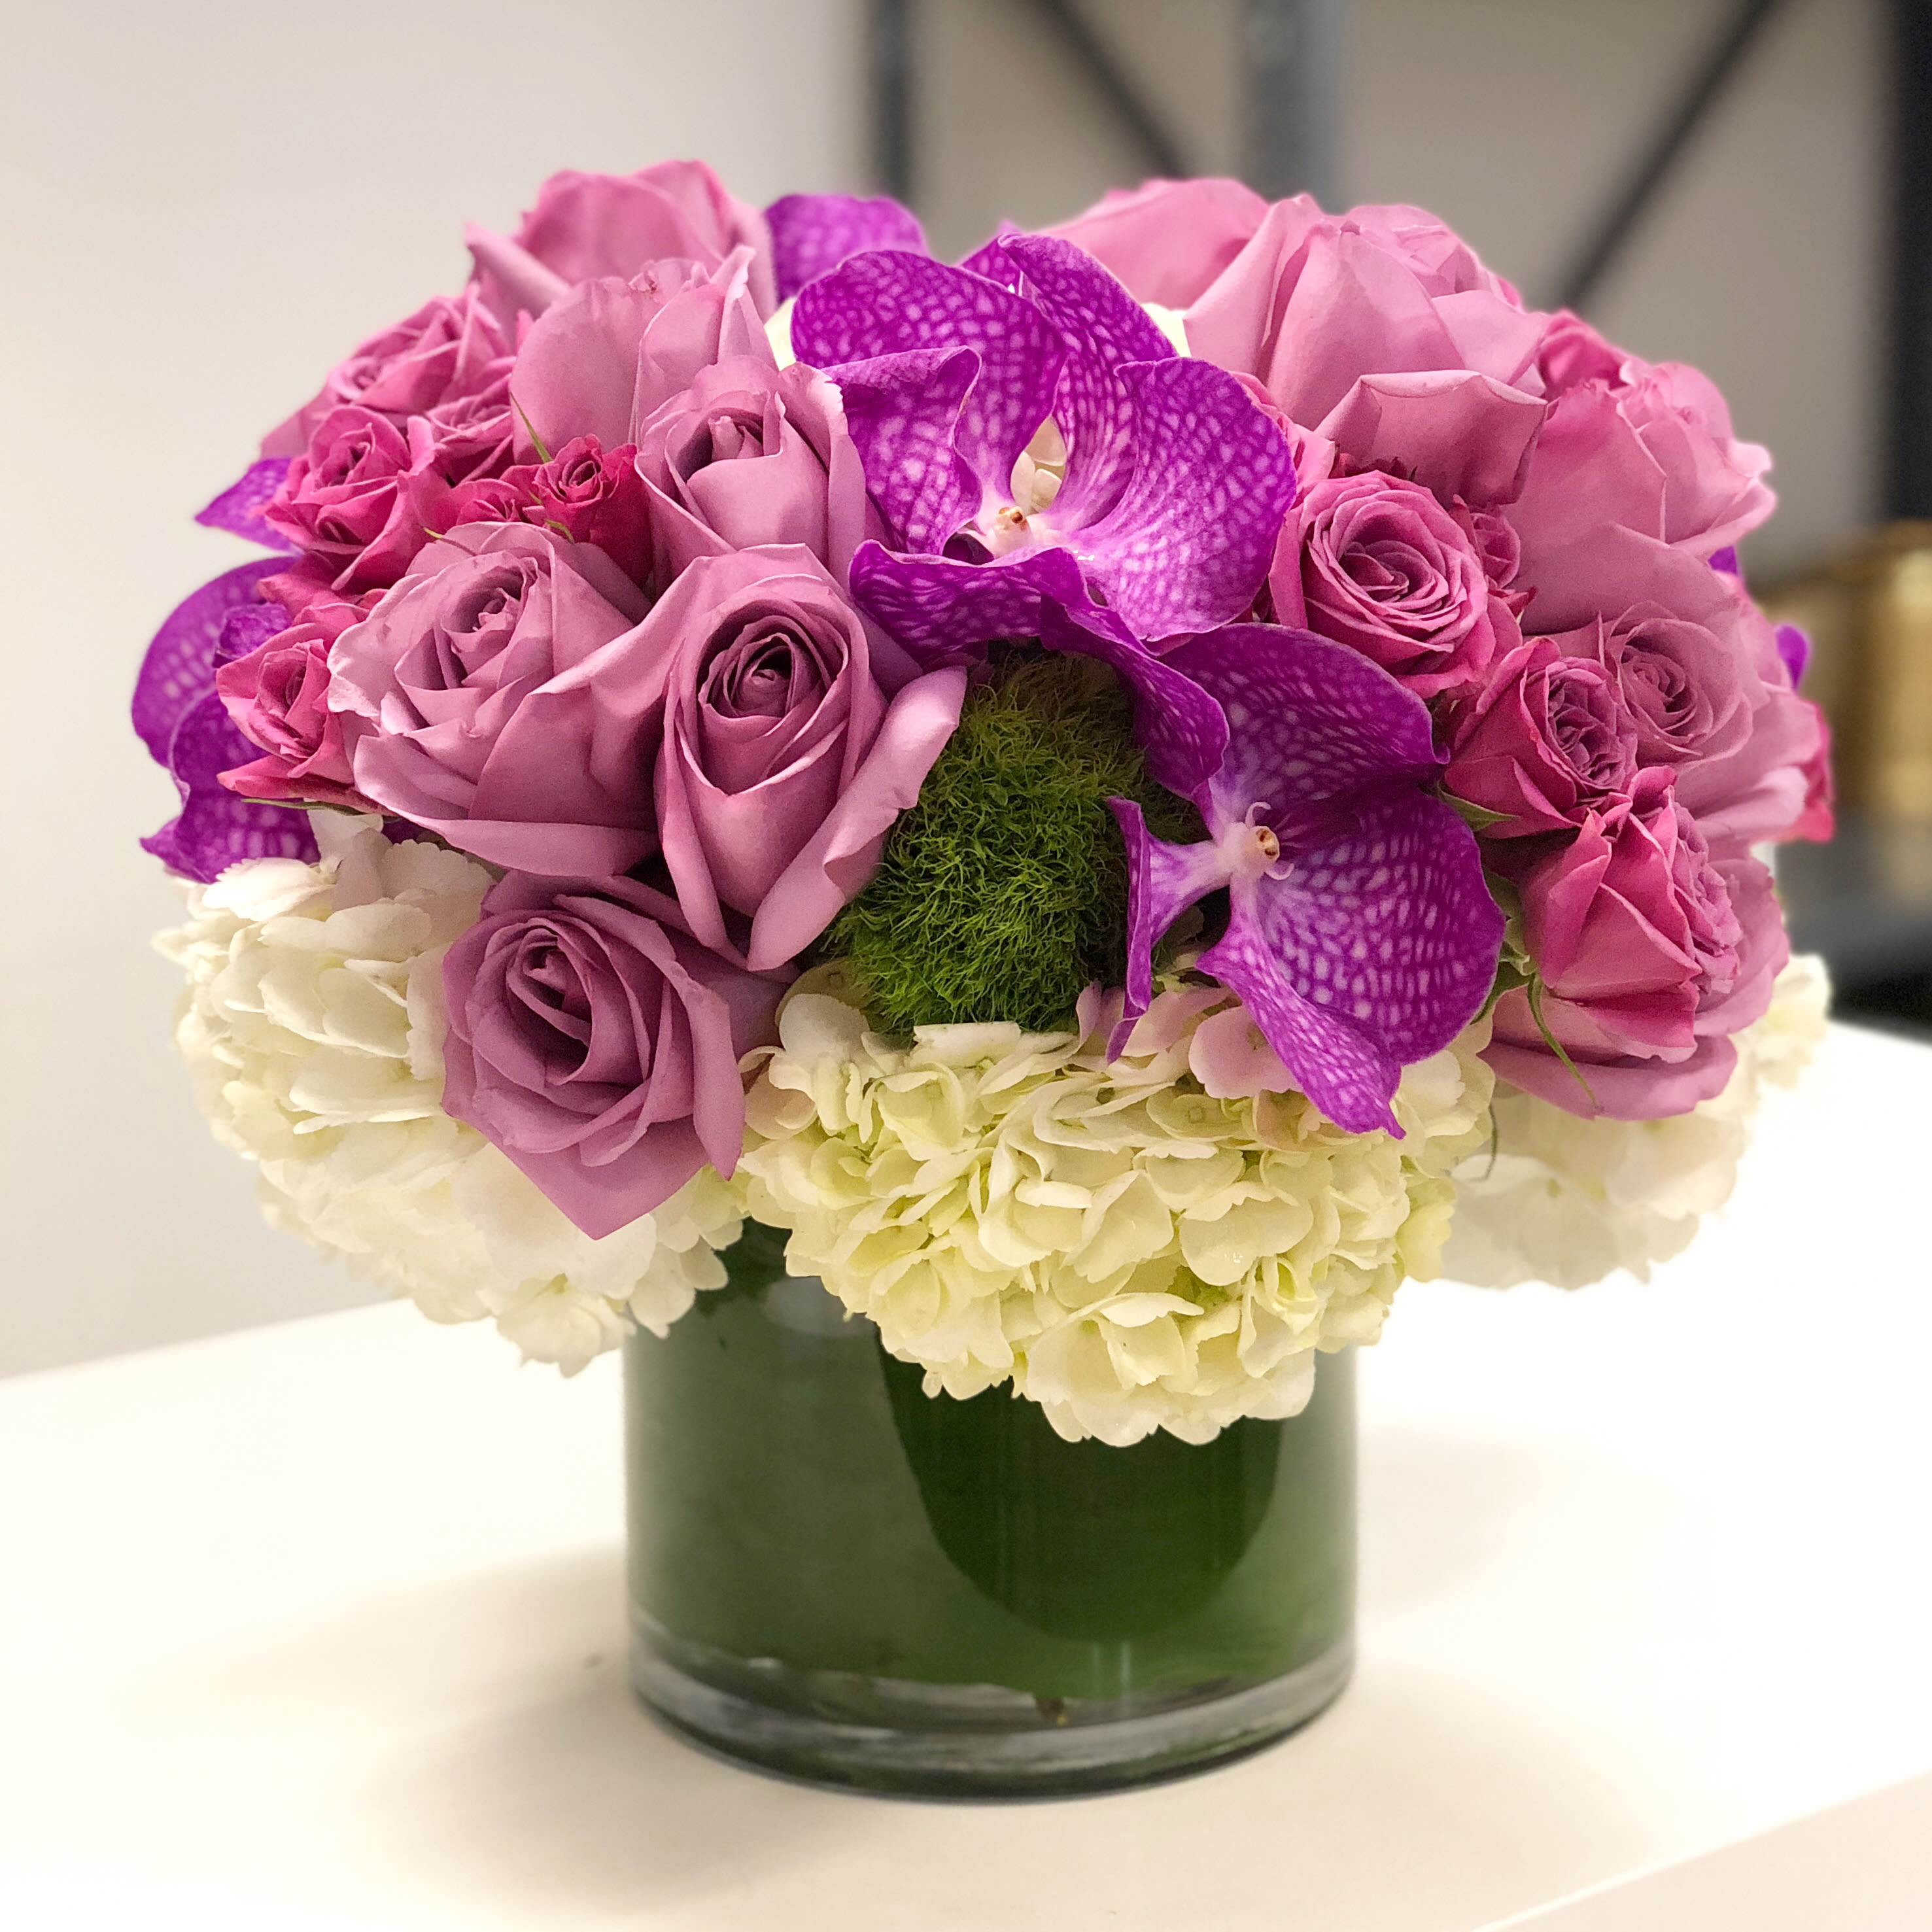 Lavender Blonde - Lavender roses, white hydrangeas, purple orchids and green dianthus arranged in a 6&quot;glass cylinder vase. Approximate height of the arrangement is 12&quot;.